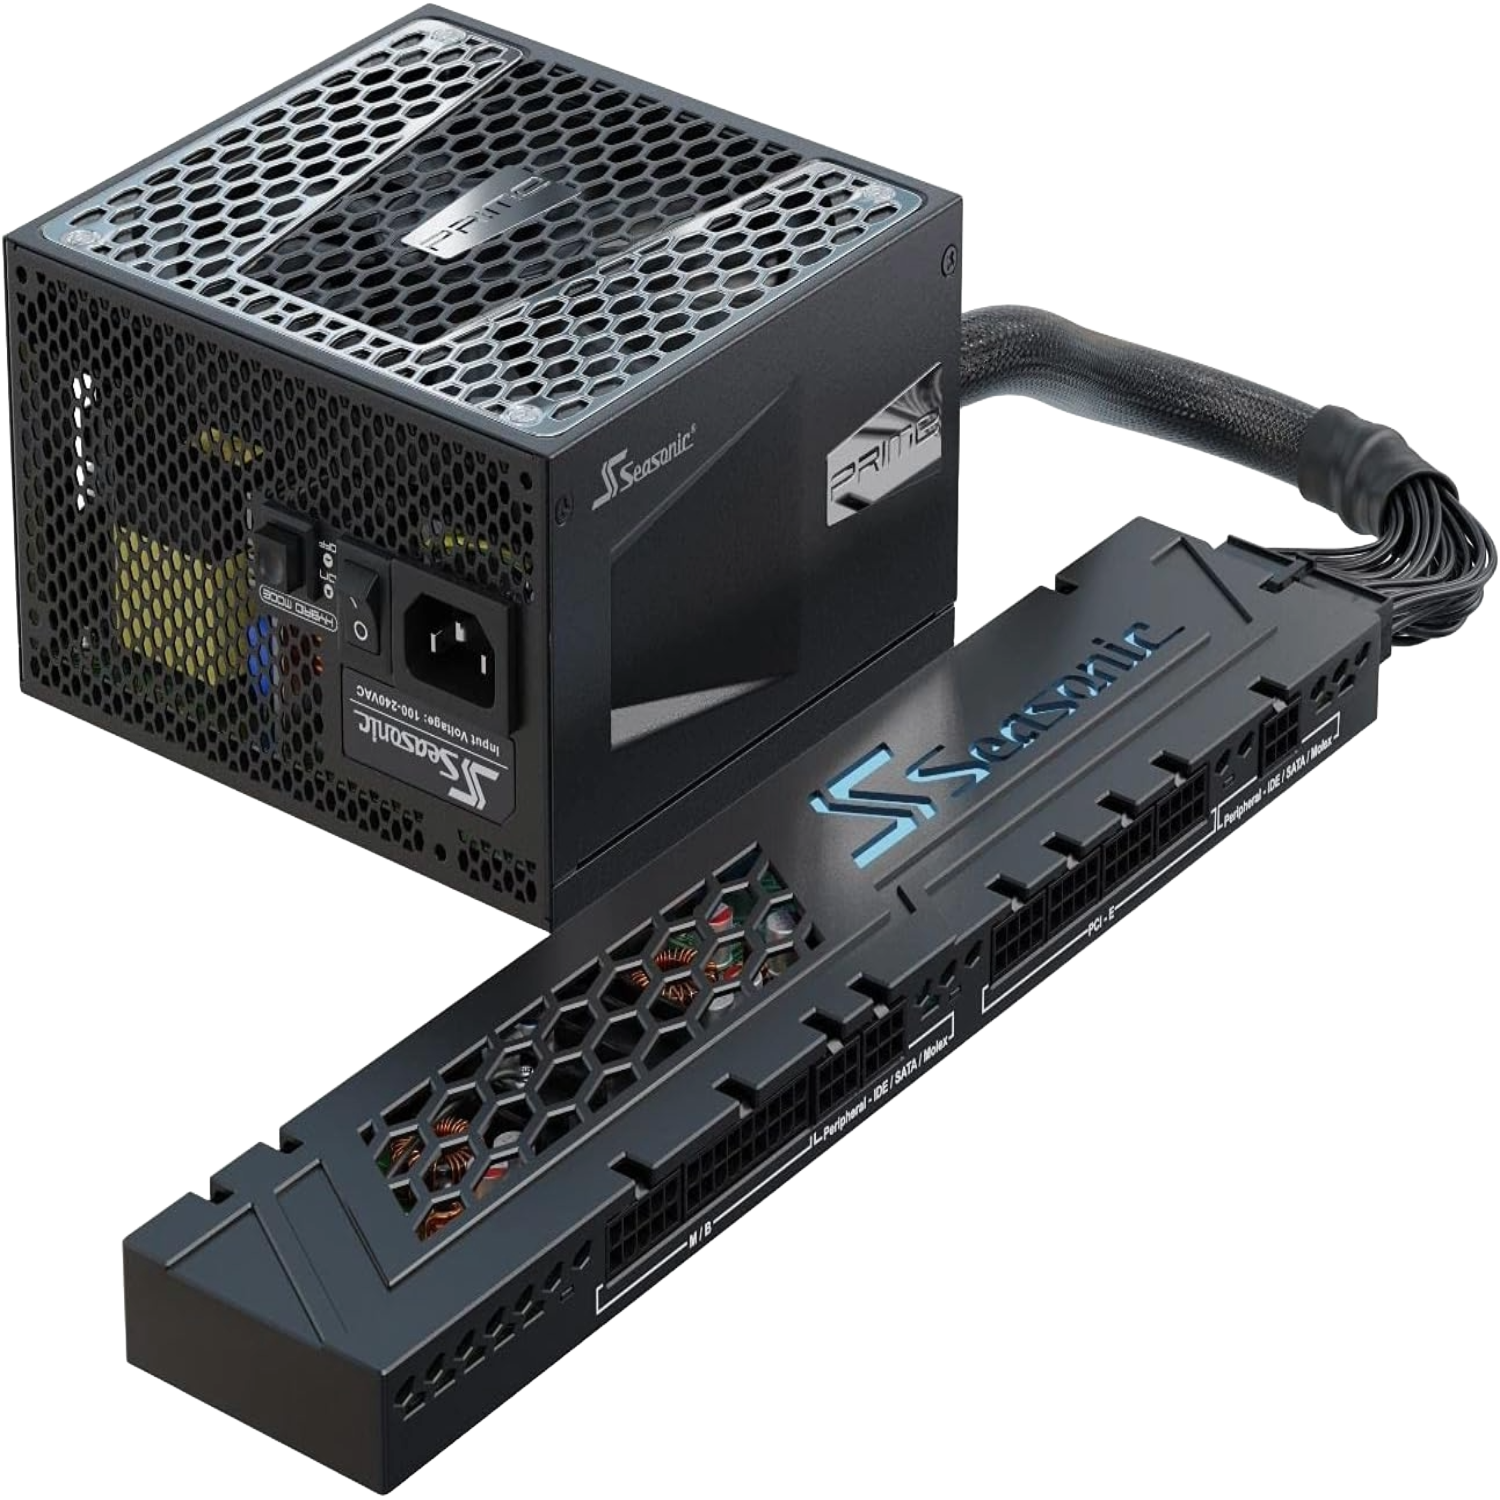 A render of the SeaSonic Connect Comprise Prime 750 power supply on a transparent background.